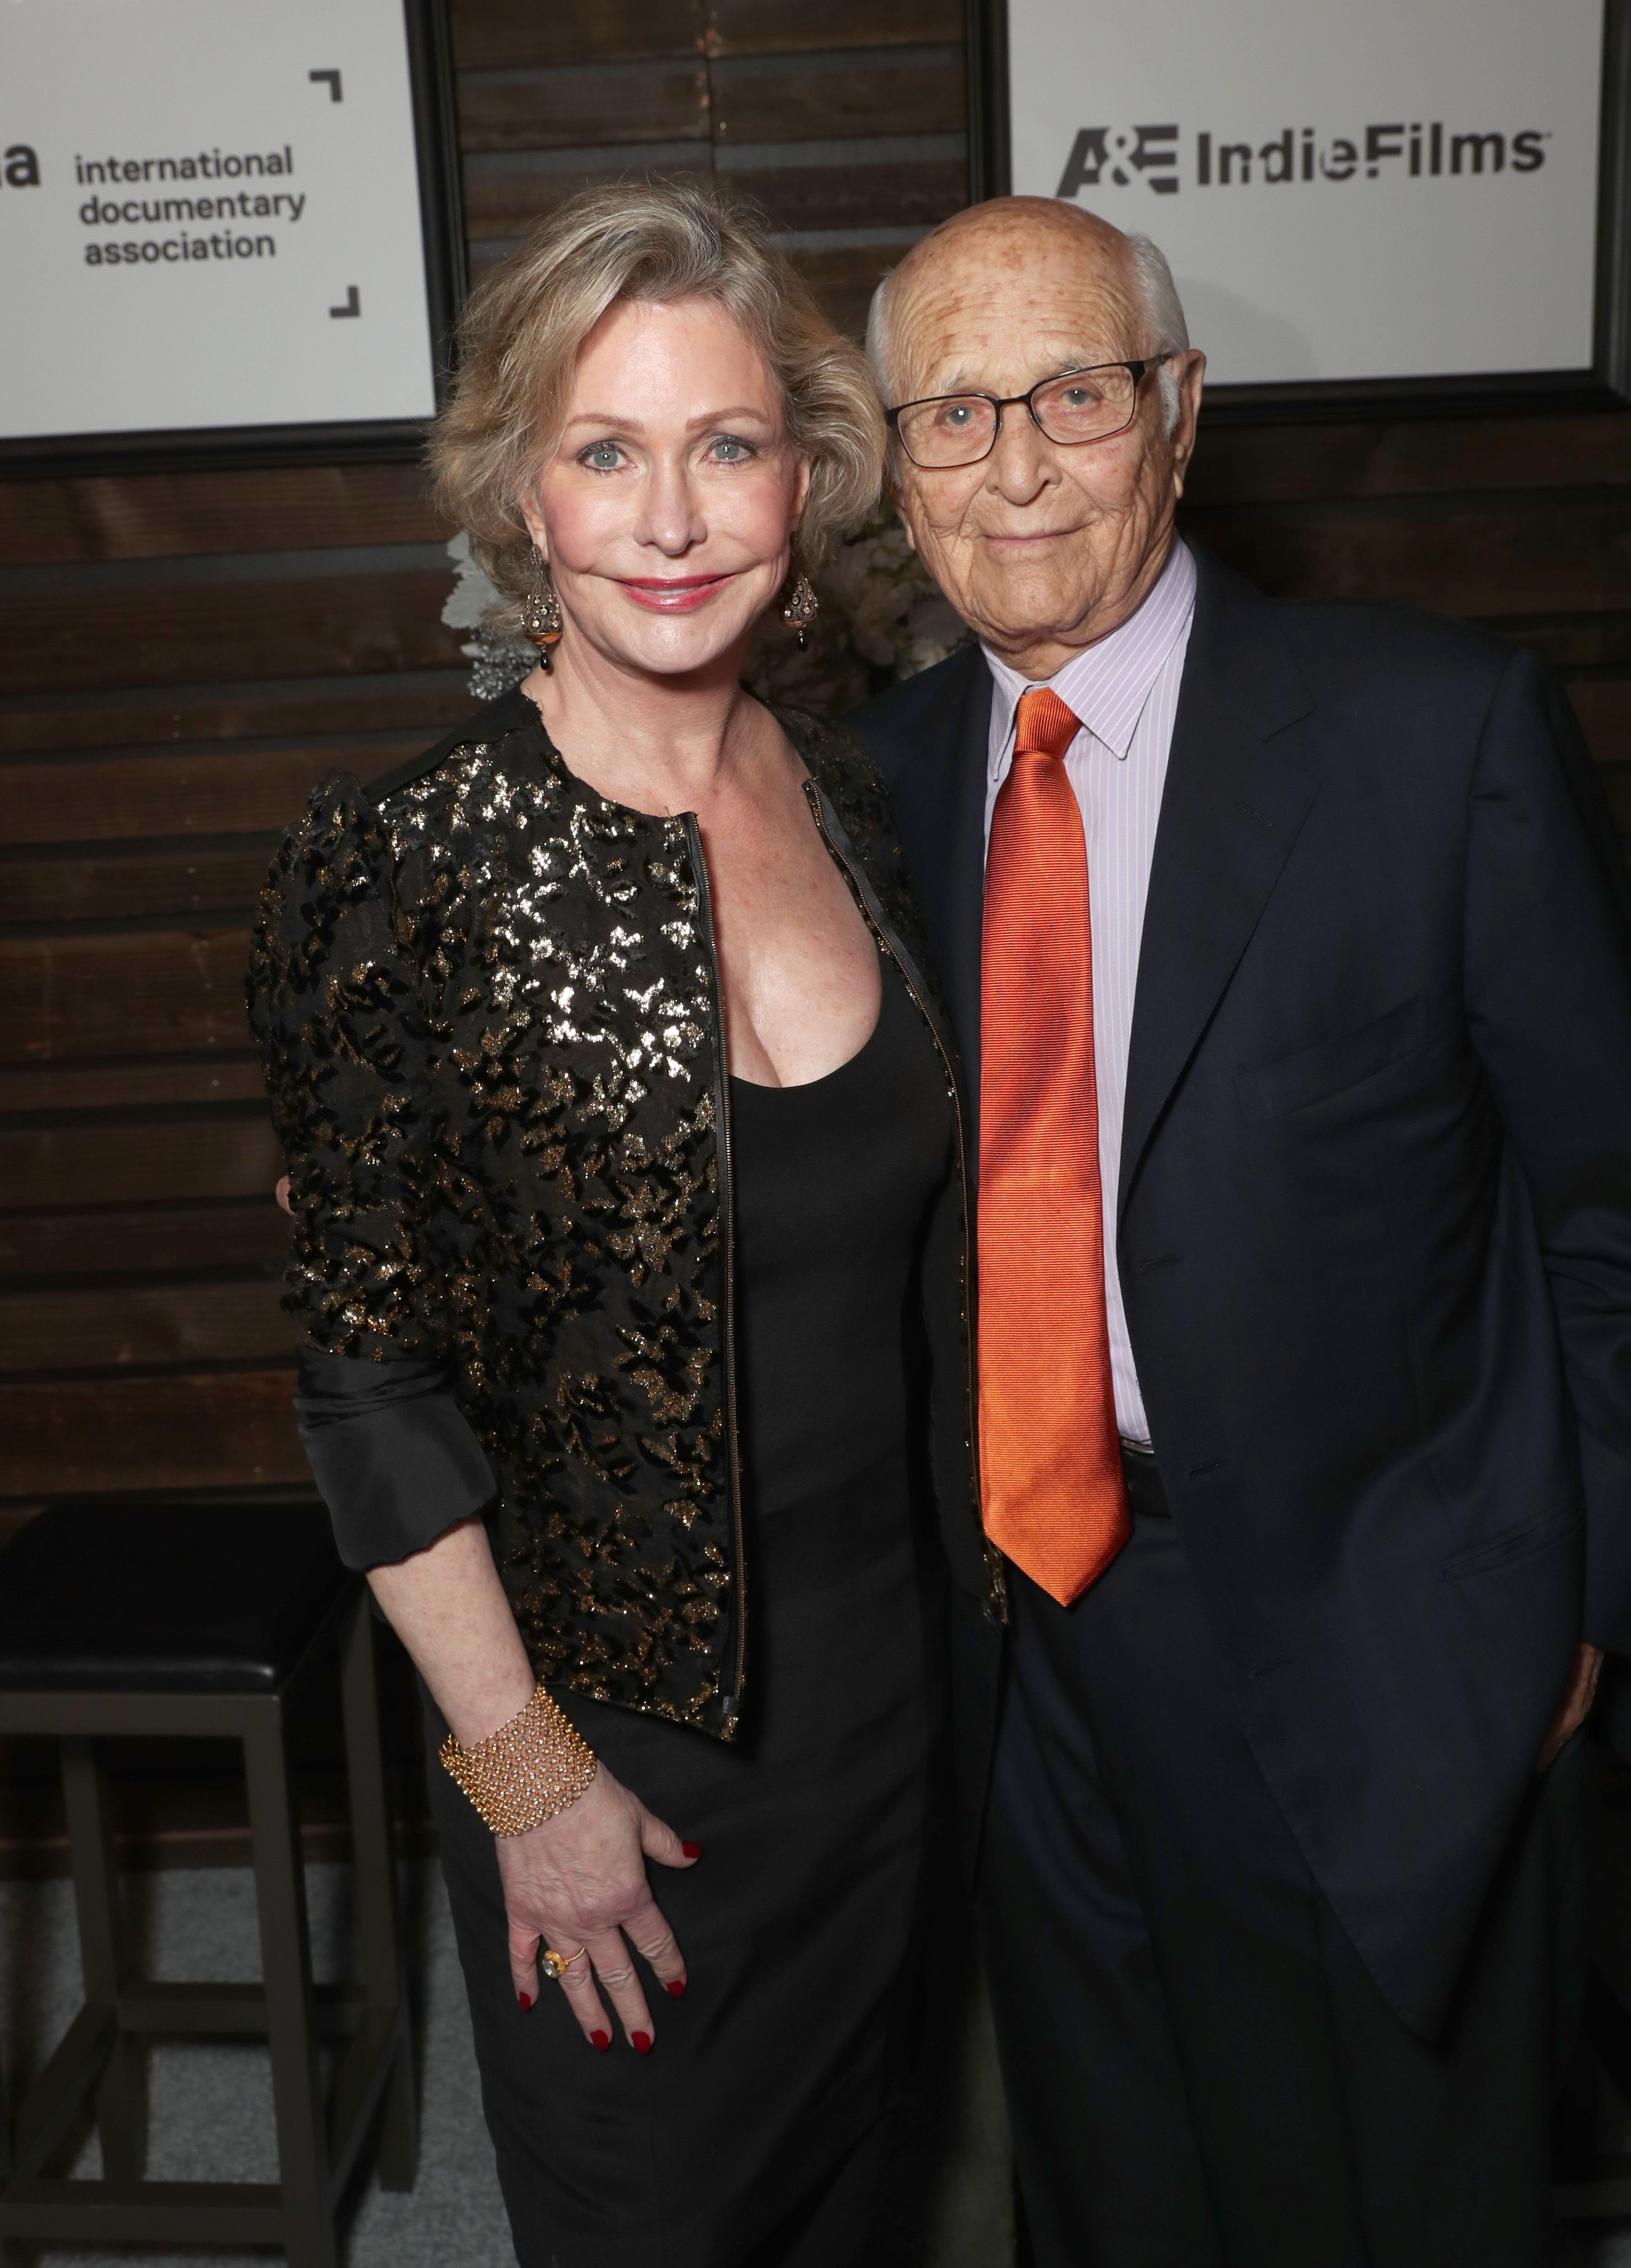 Lyn and Norman Lear at the 32nd Annual IDA Documentary Awards on December 9, 2016, in Hollywood, California | Source: Getty Images